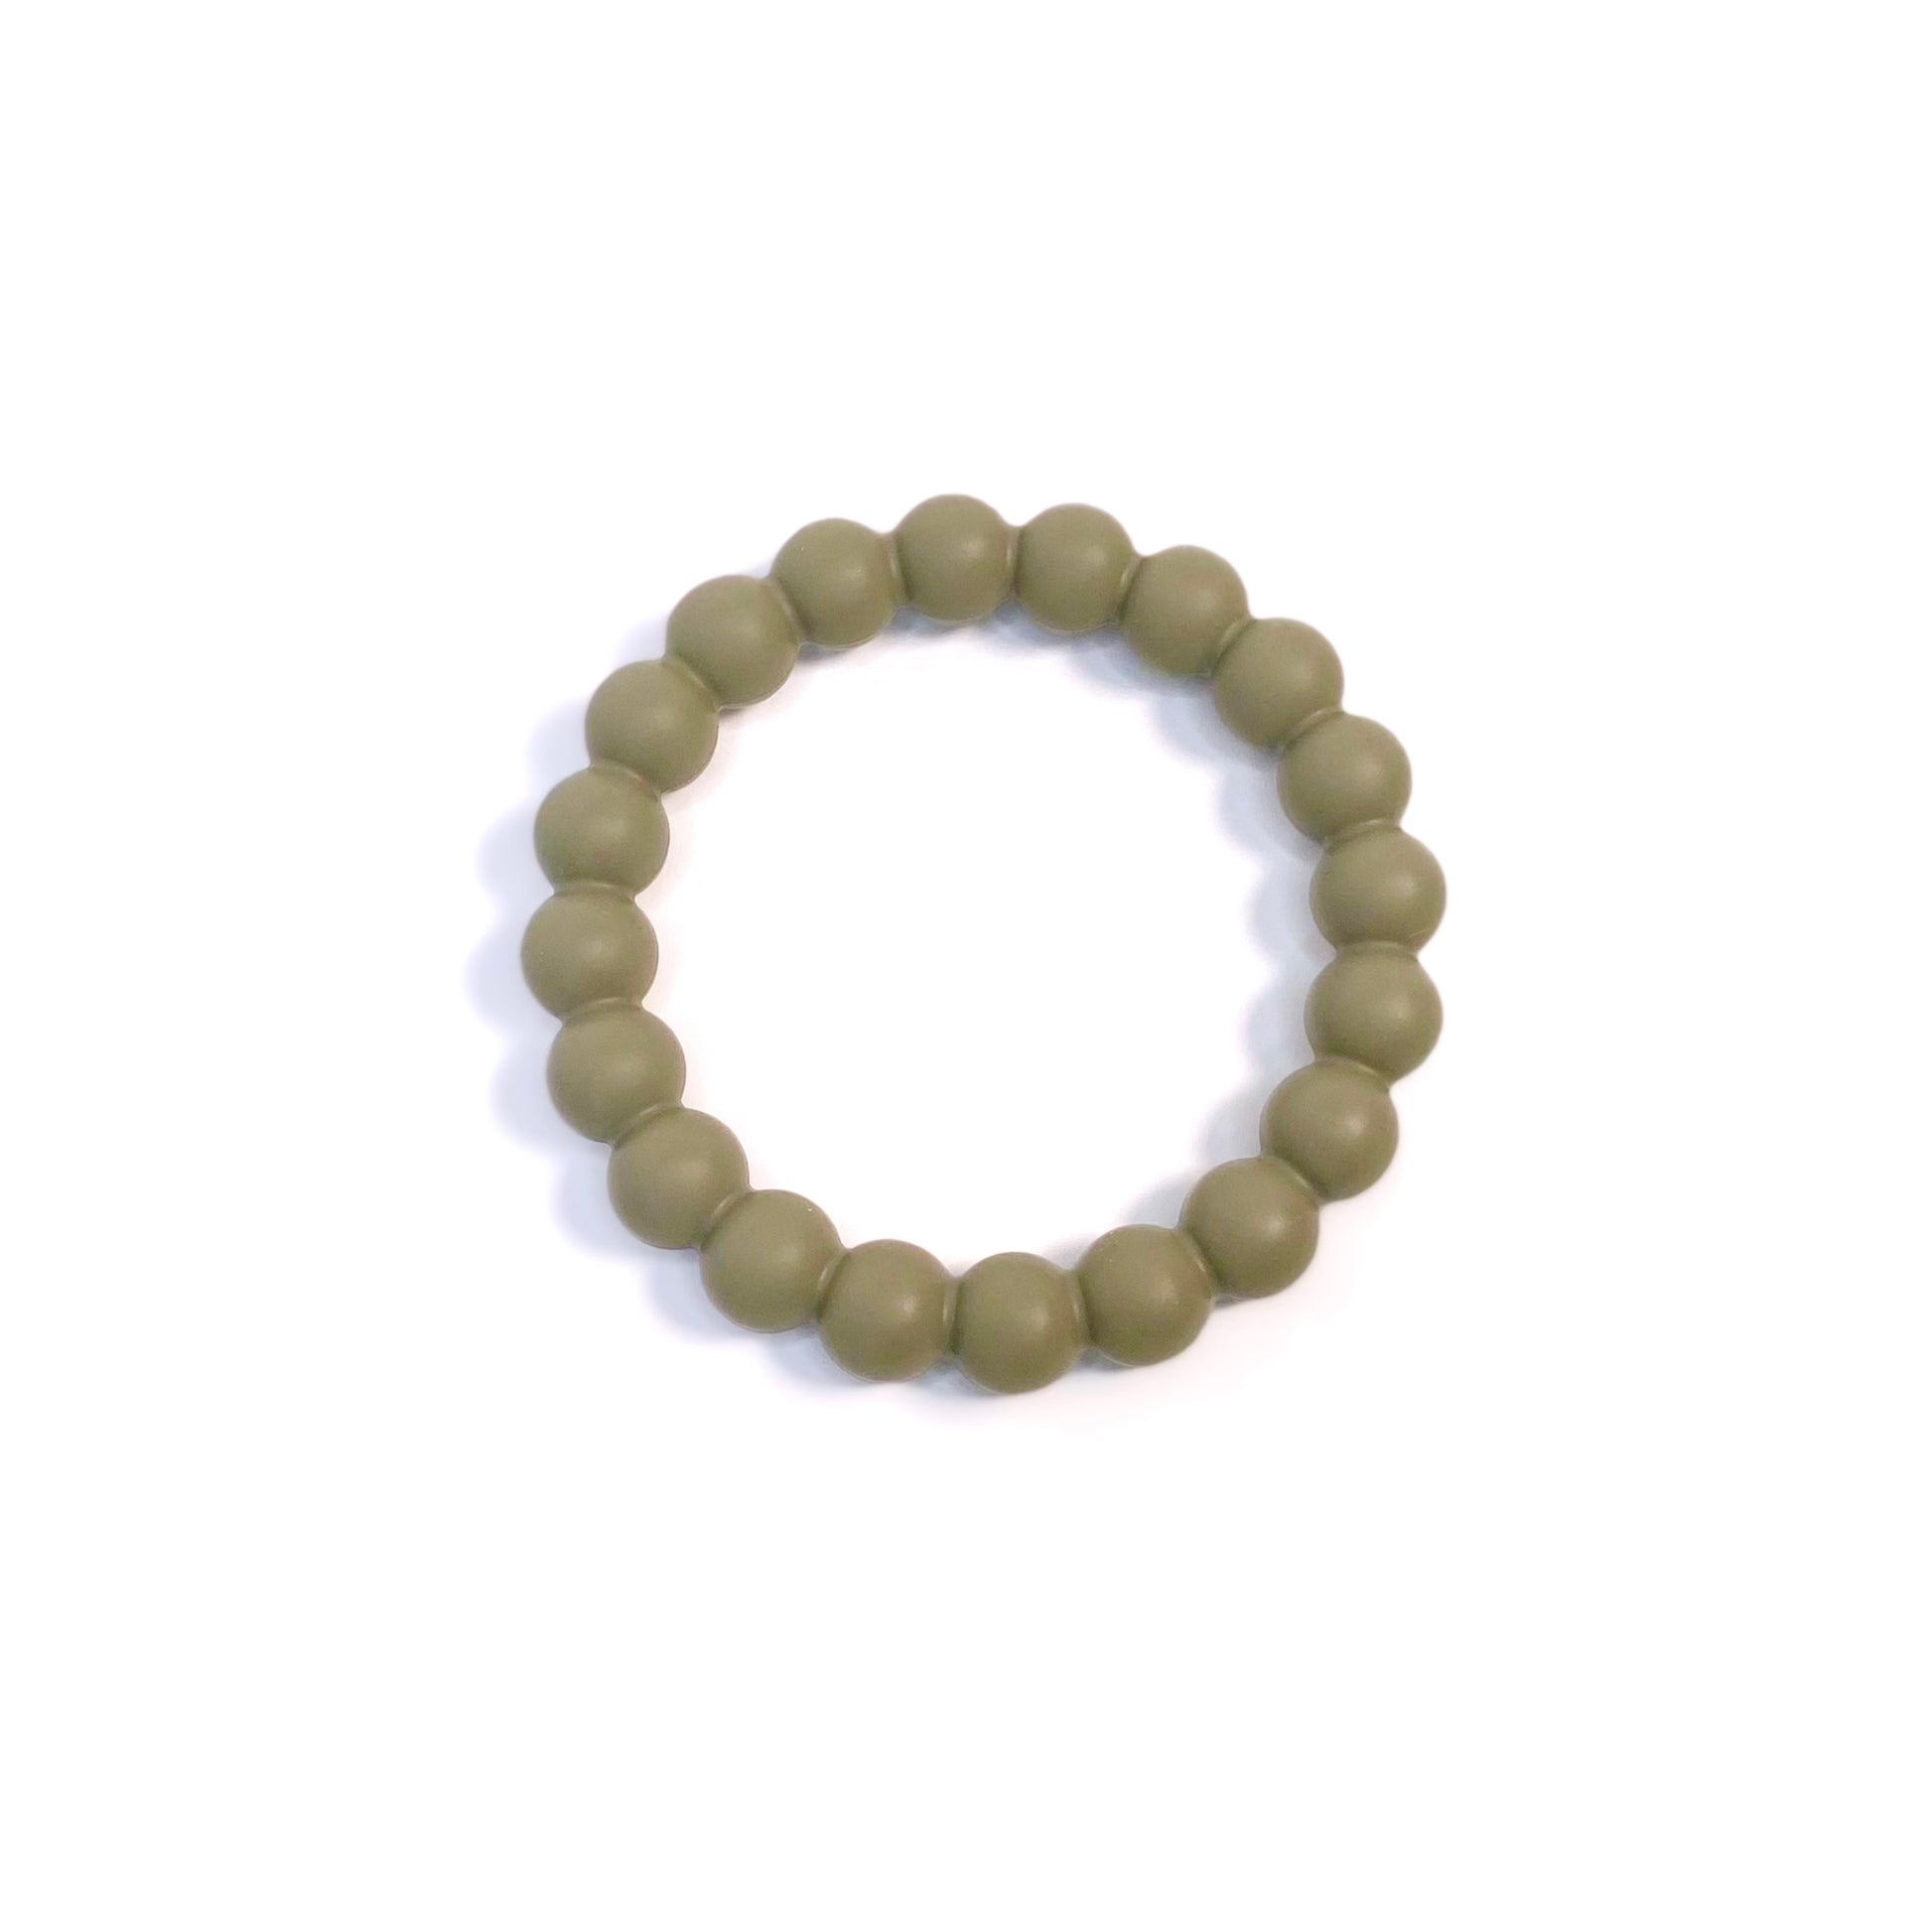 A green beaded silicone teething ring. Can be worn as a bracelet.